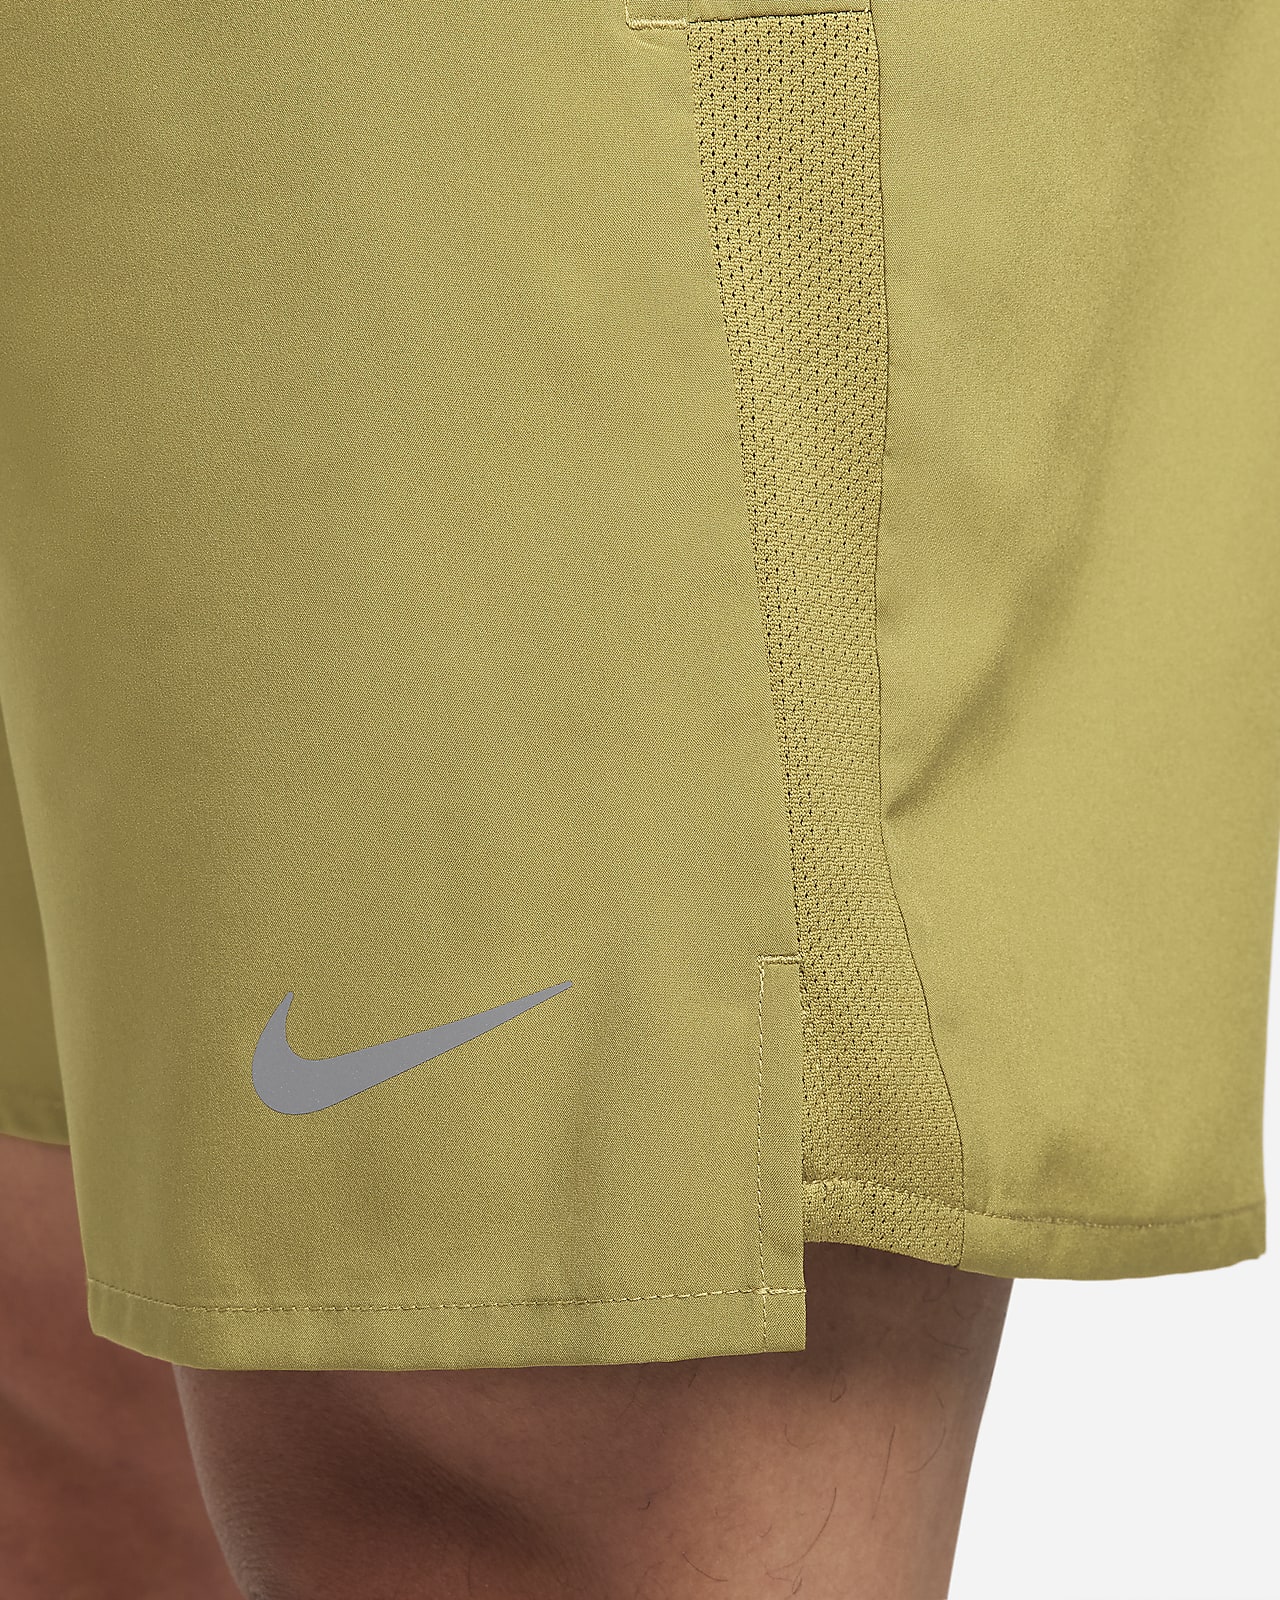 Nike Short Running Hombre Dri-Fit Challenger Brief-Lined gris